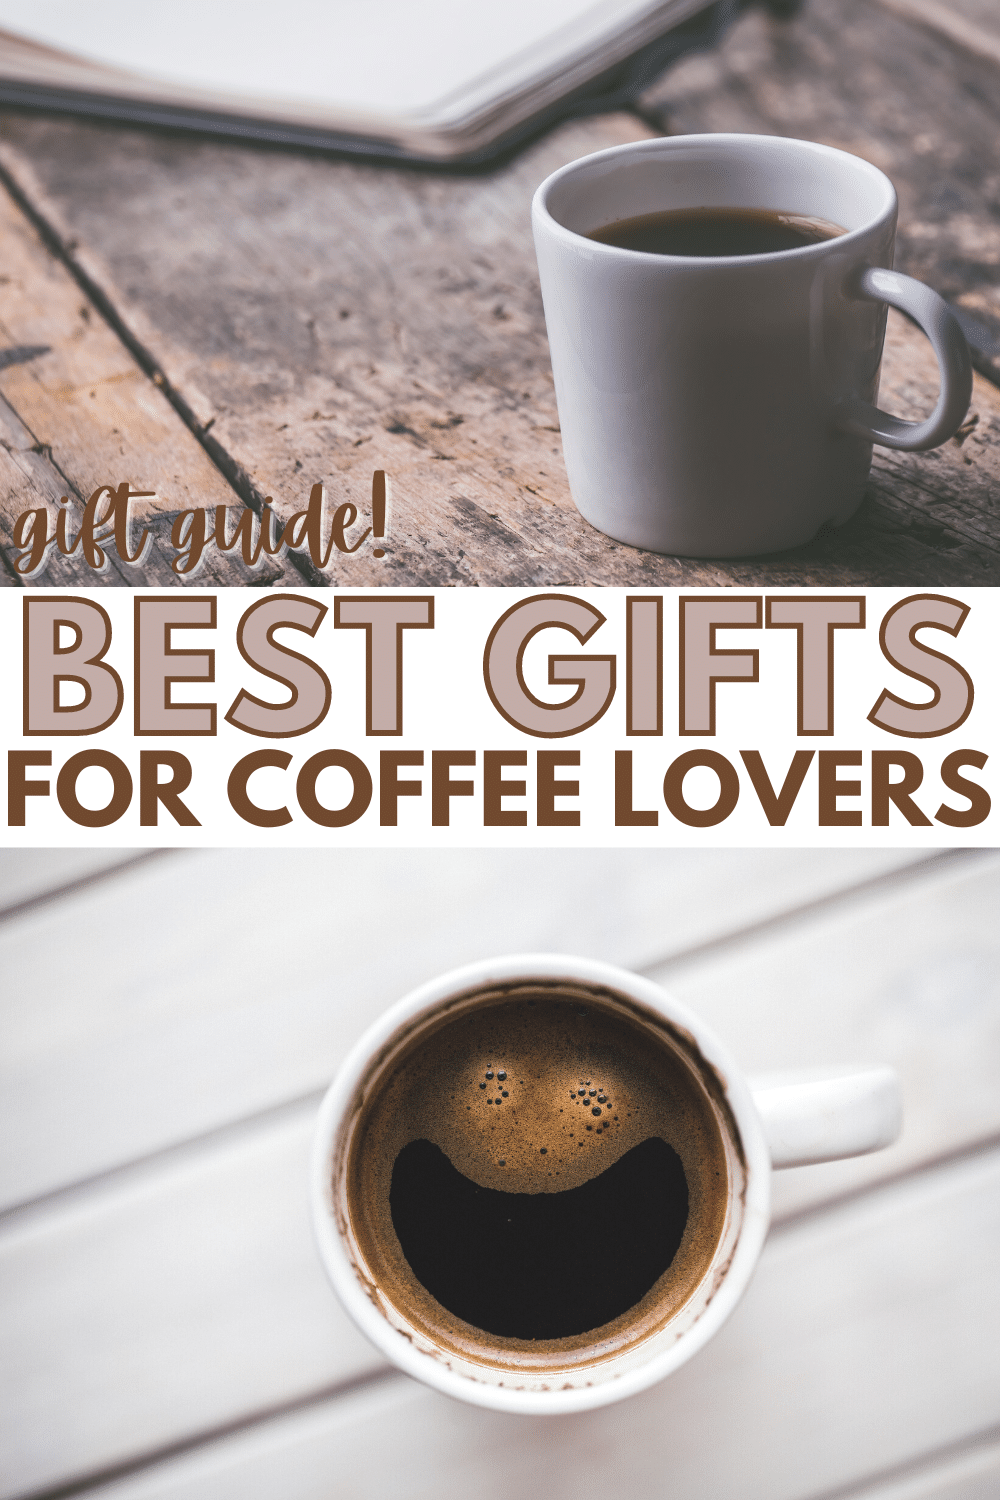 There are over a dozen other ways you can delight coffee lovers other than with a gift card. You can find these ideas in the best gifts for coffee lovers. #giftguide #giftideas #coffeelovers #coffeegifts via @wondermomwannab